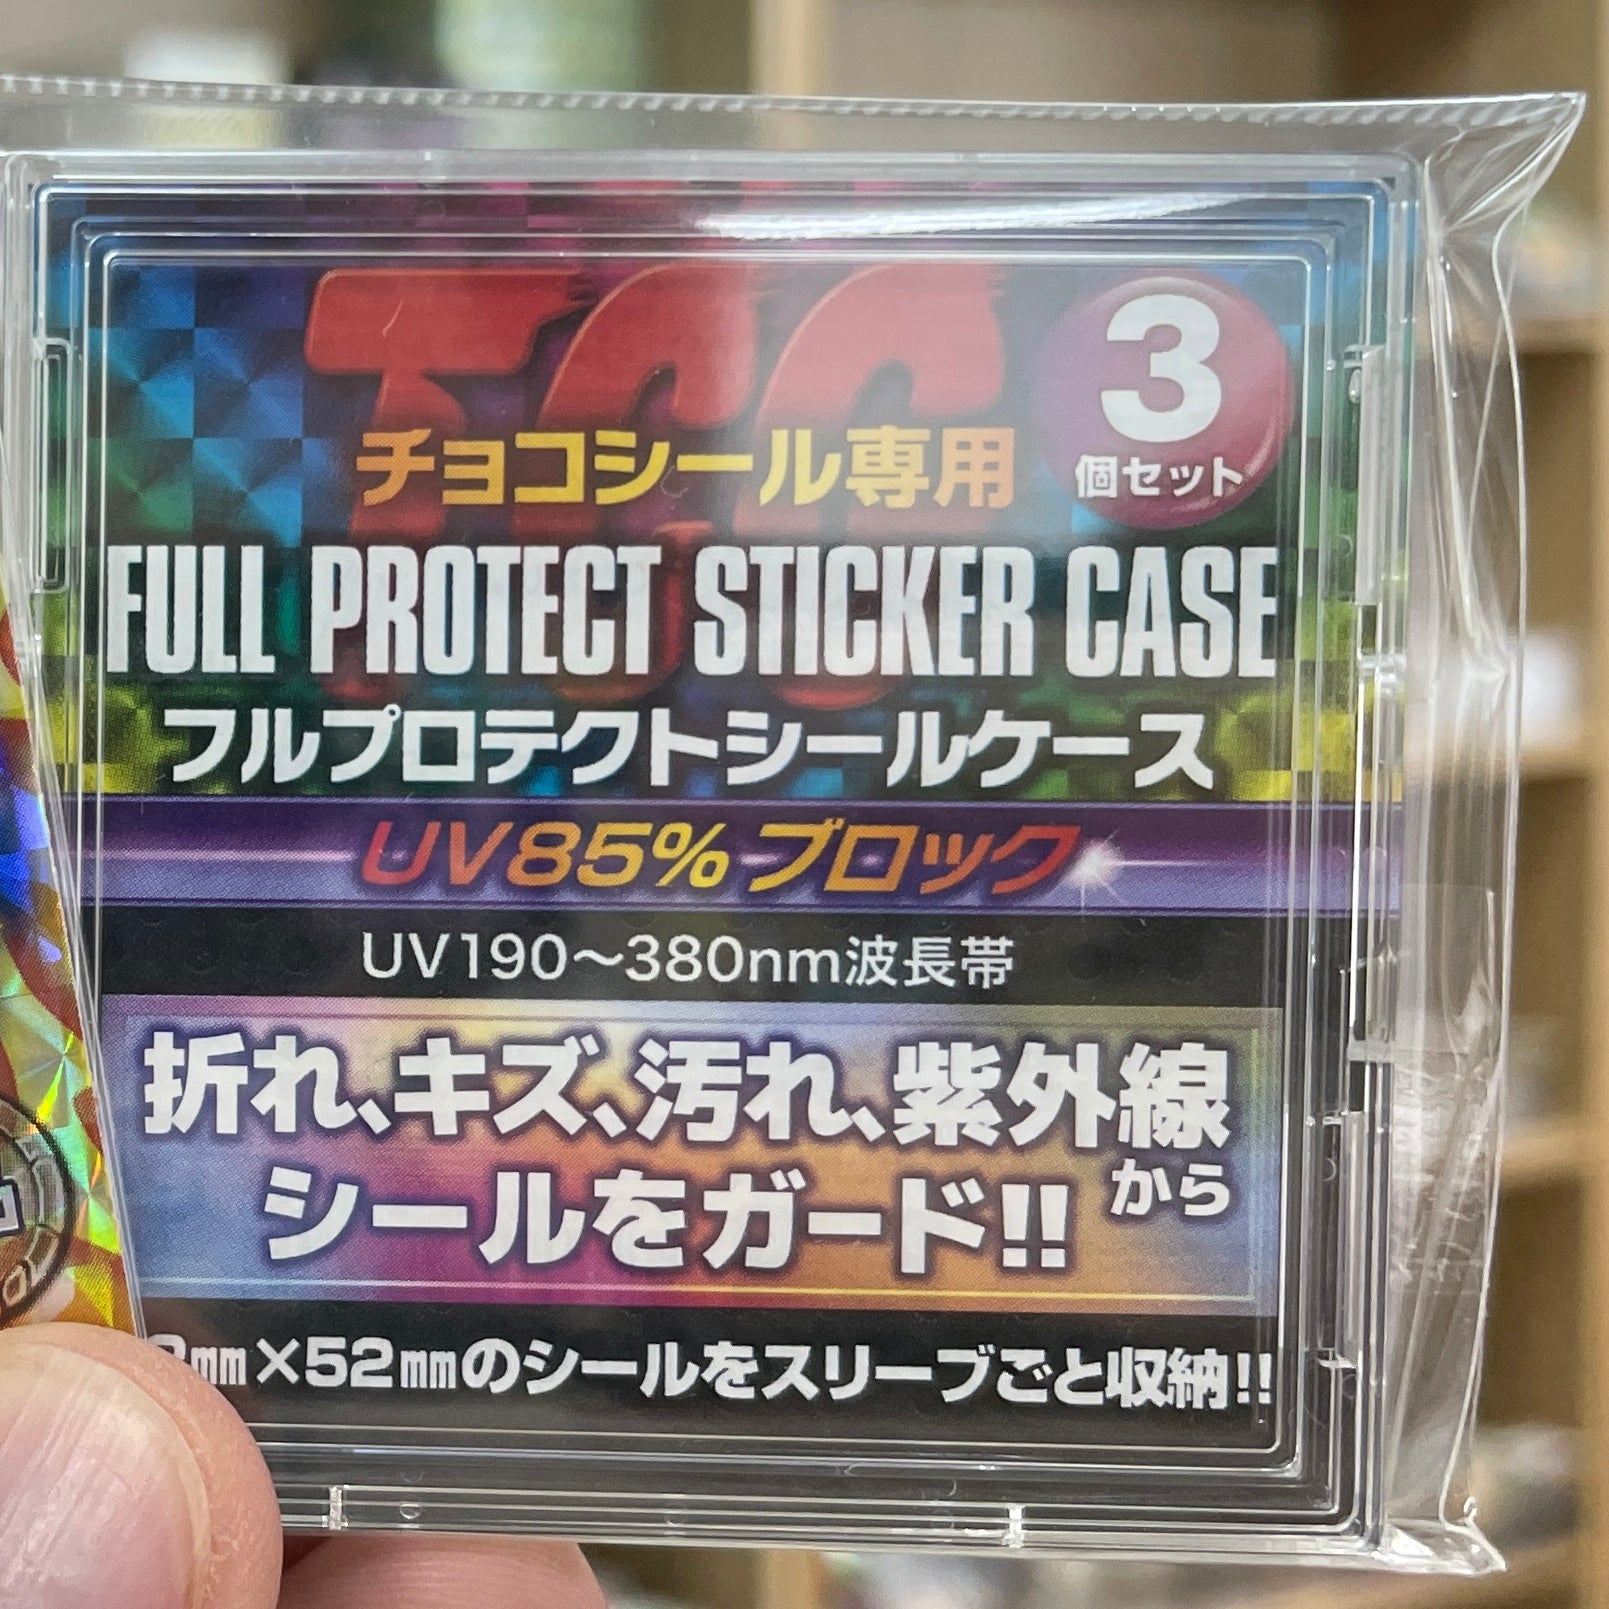 FULL PROTECT STICKER CASE (set of 3)